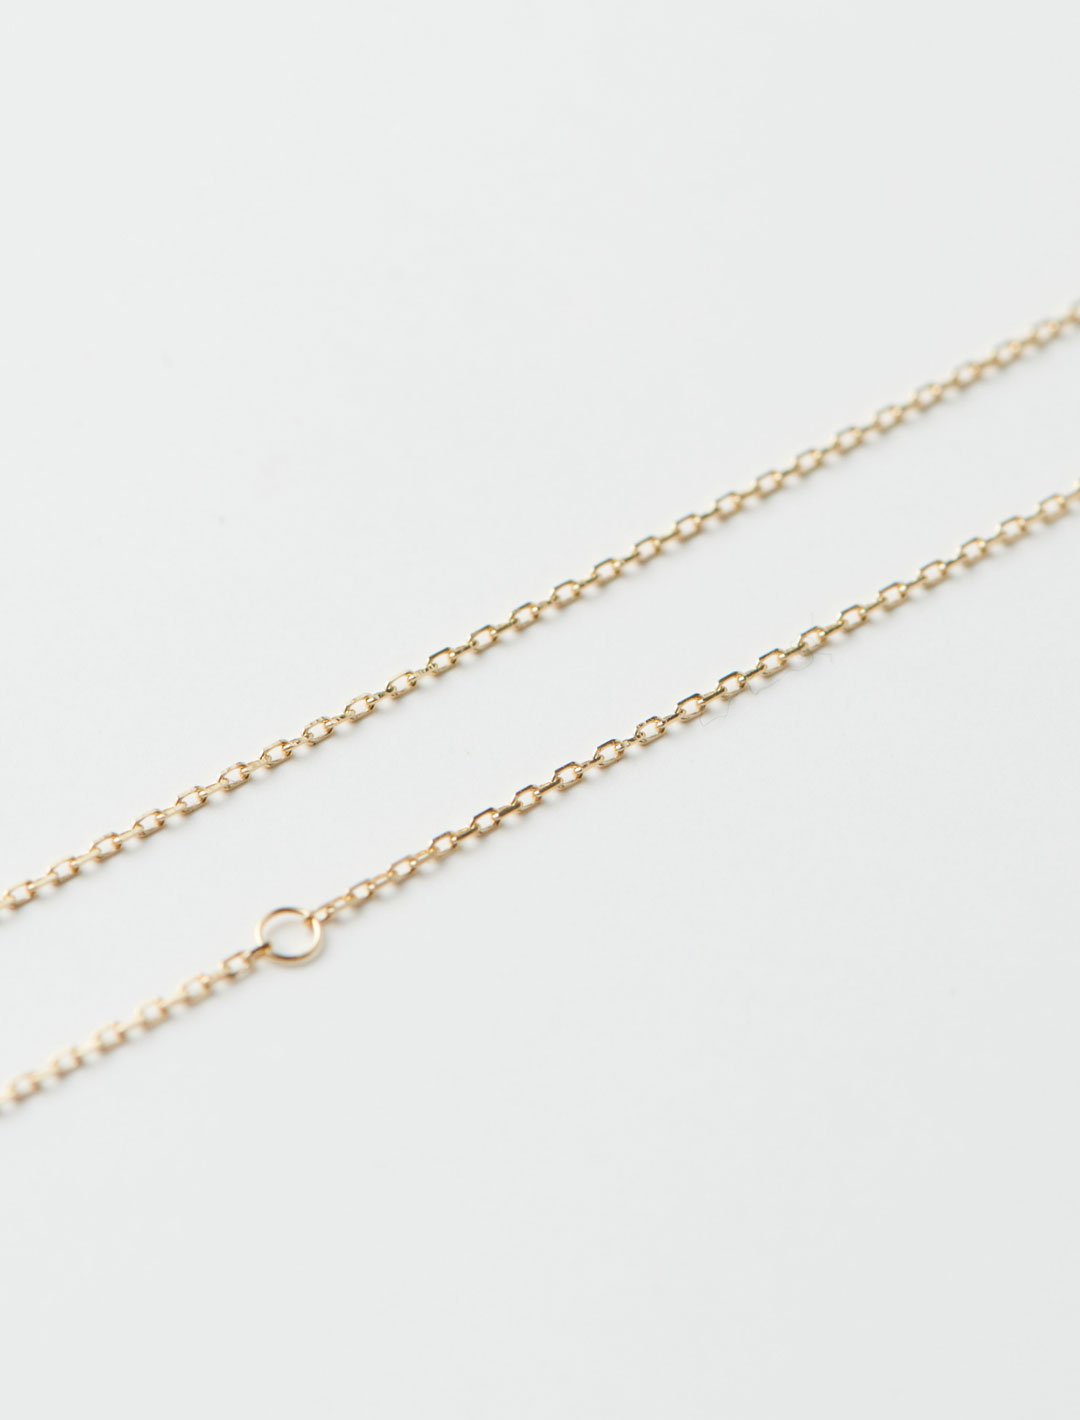 MIRROR Necklace L 80cm - Yellow Gold